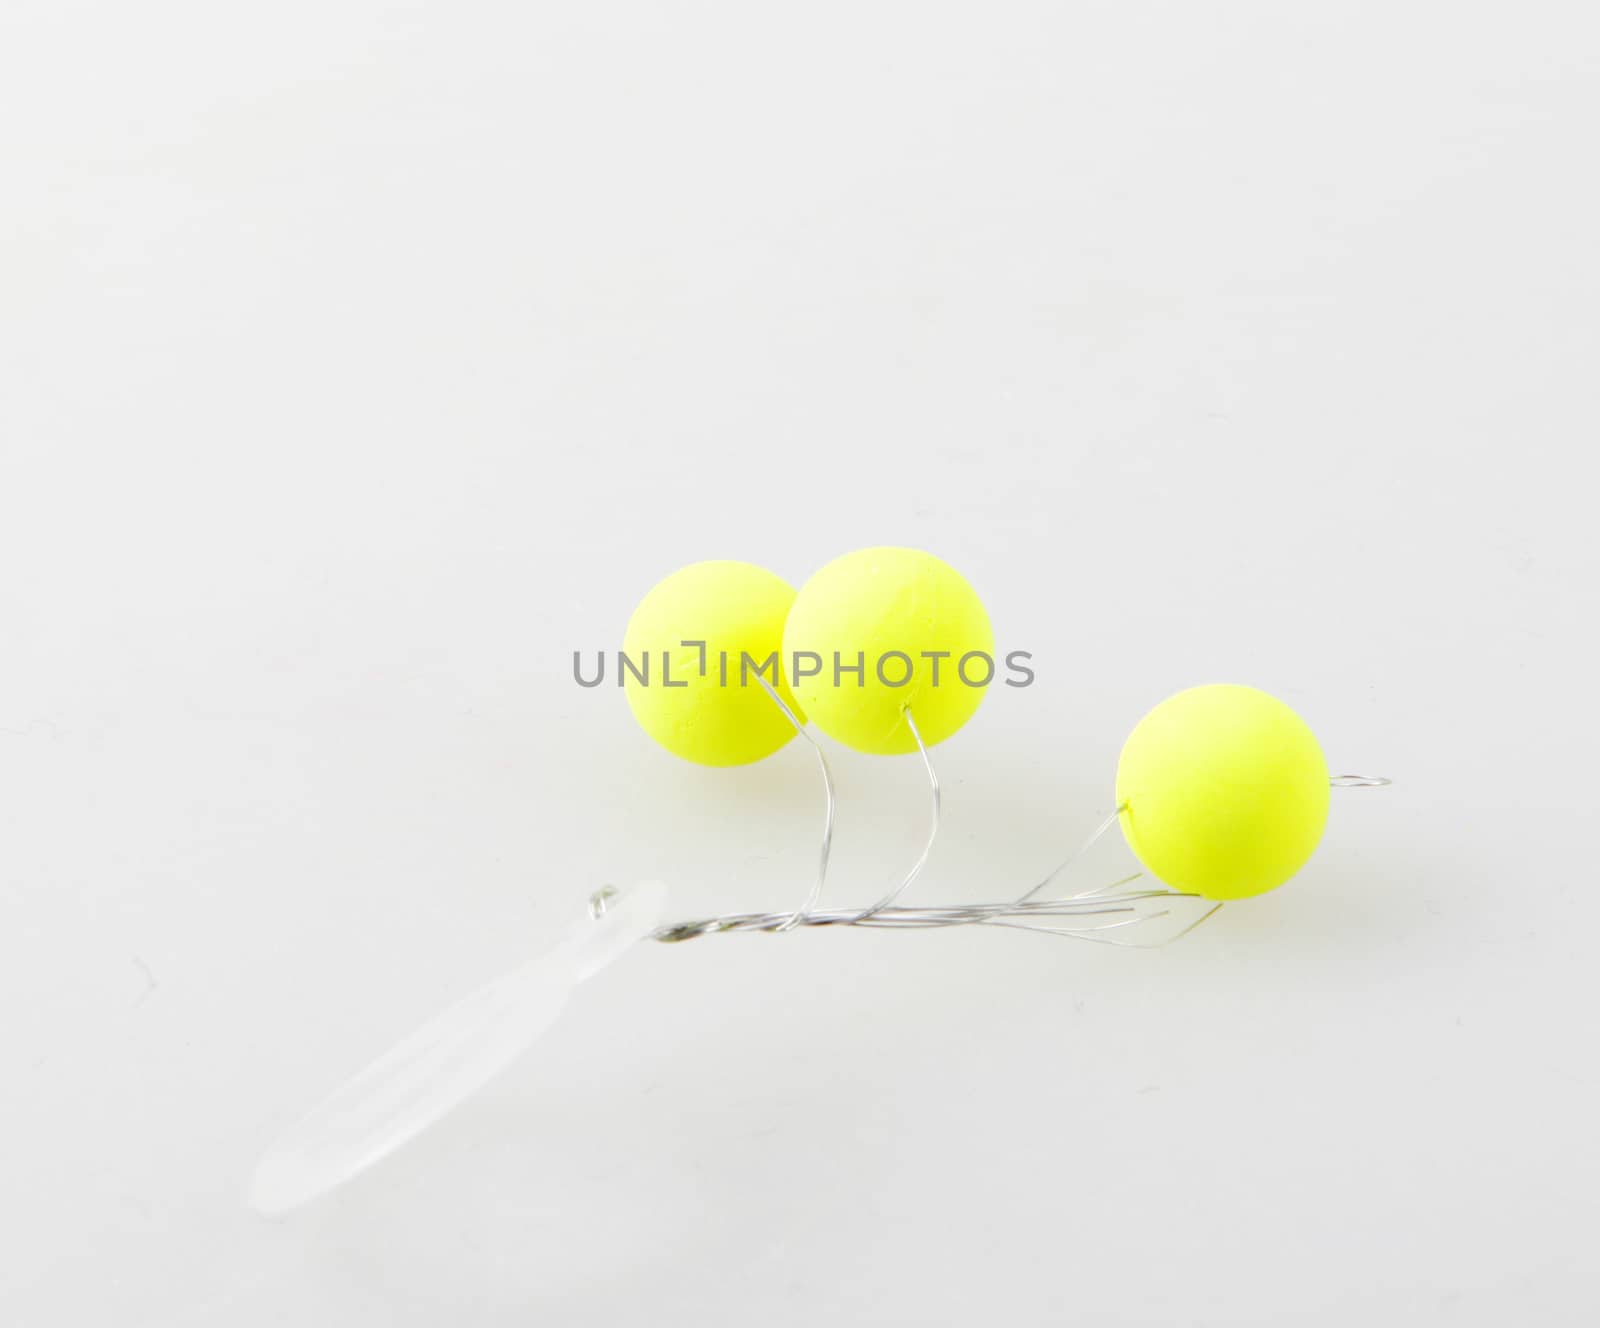 Fishing Tackle Against White Background